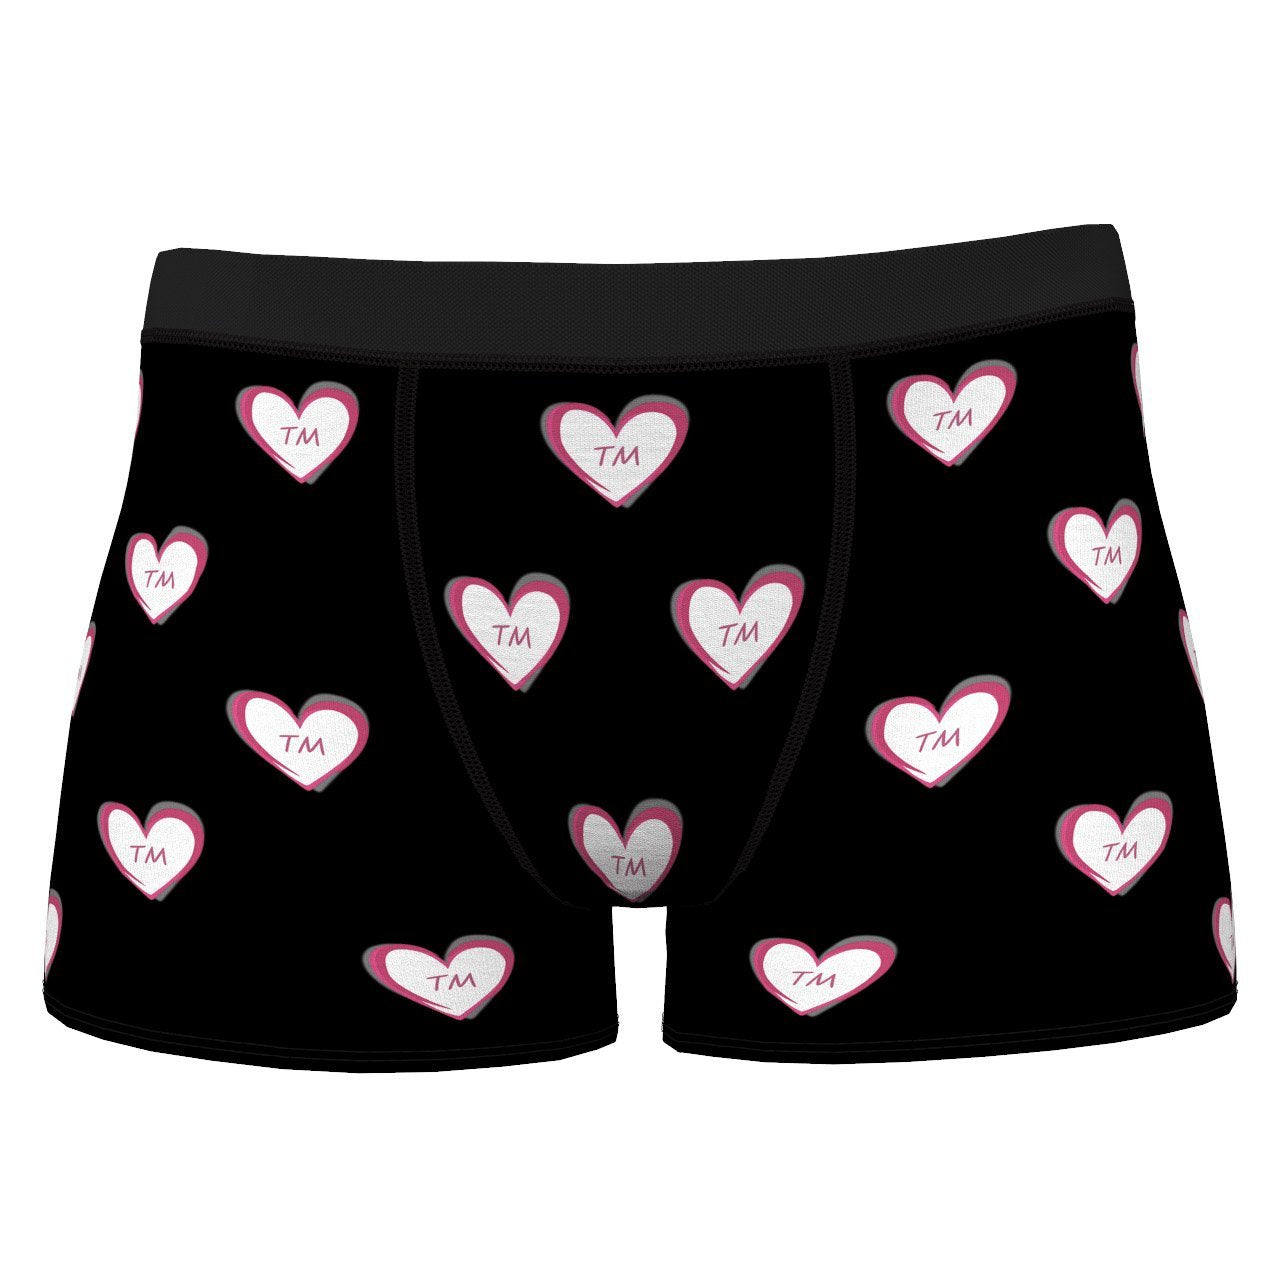 Name On Black Boxers  BX1310 XS(Waist 25-27in) Official couple Merch